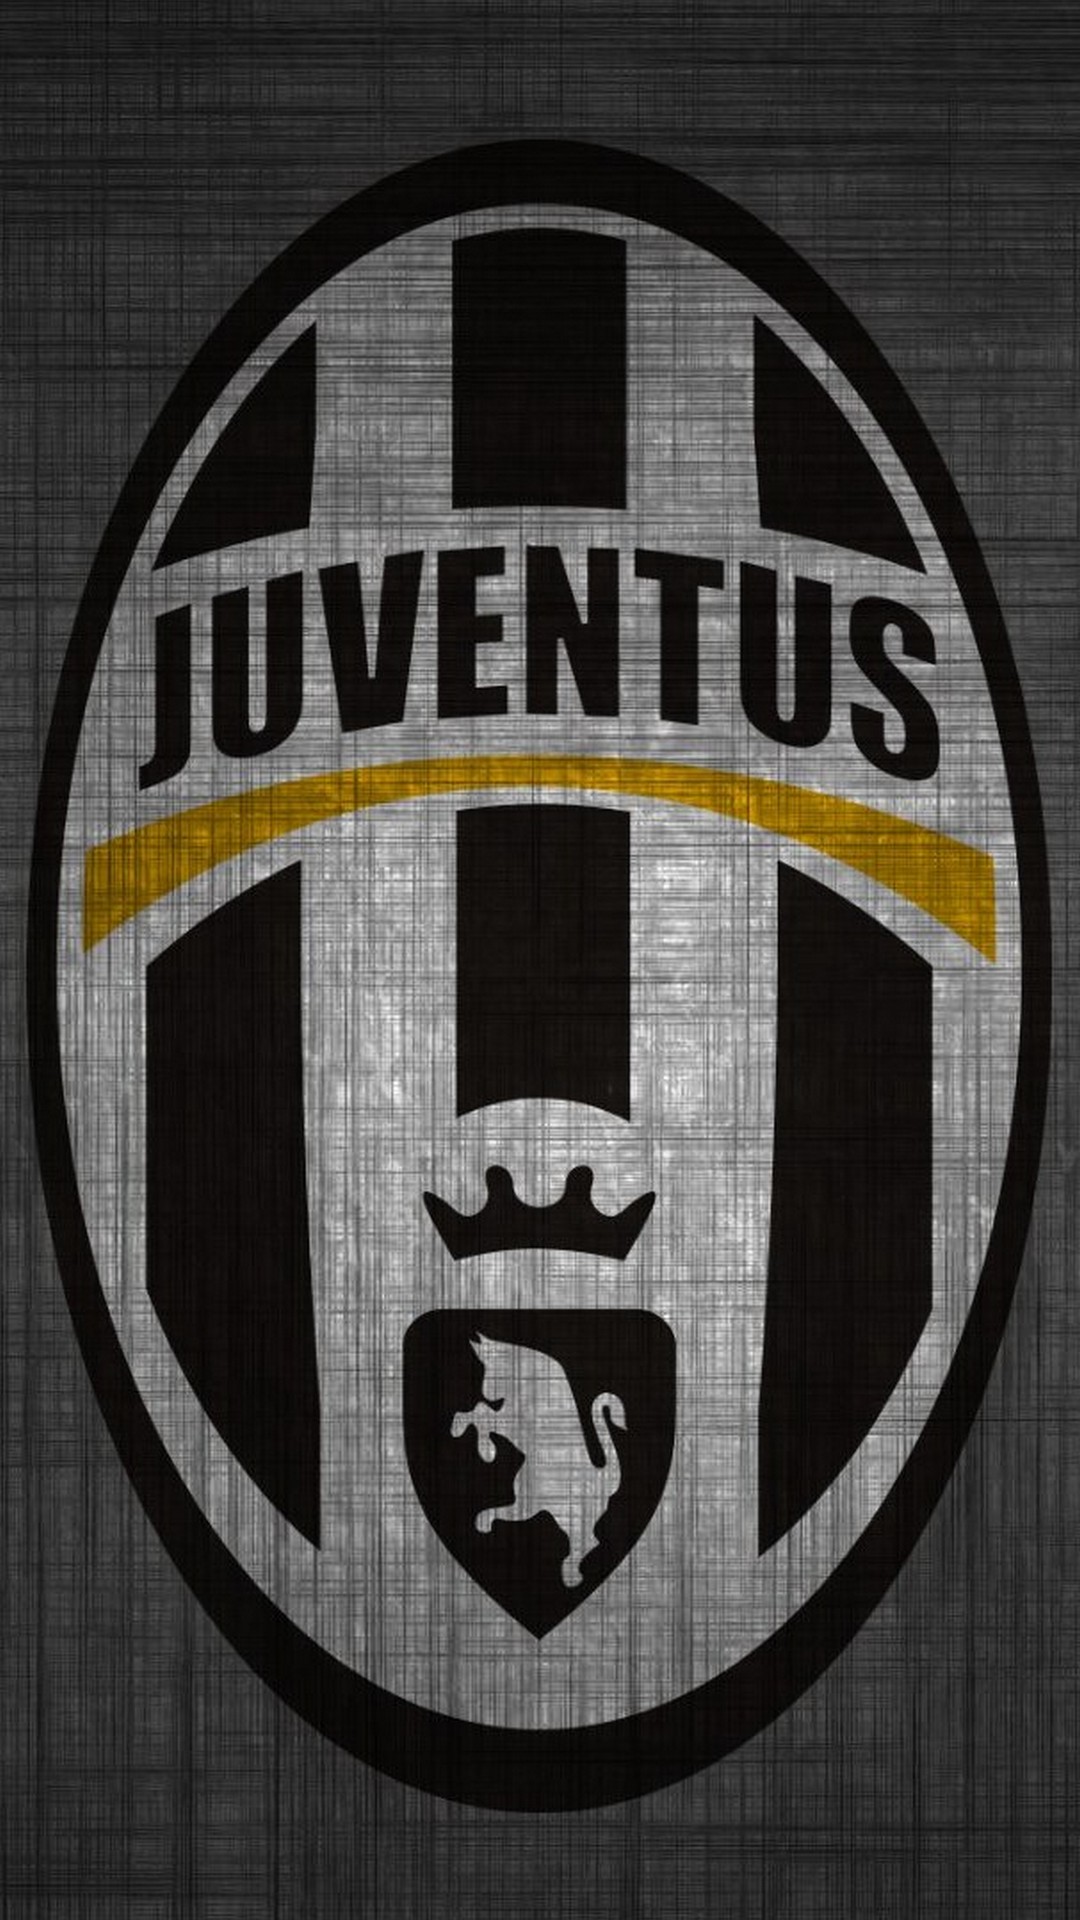 Juventus Fc Wallpaper For iPhone resolution 1080x1920